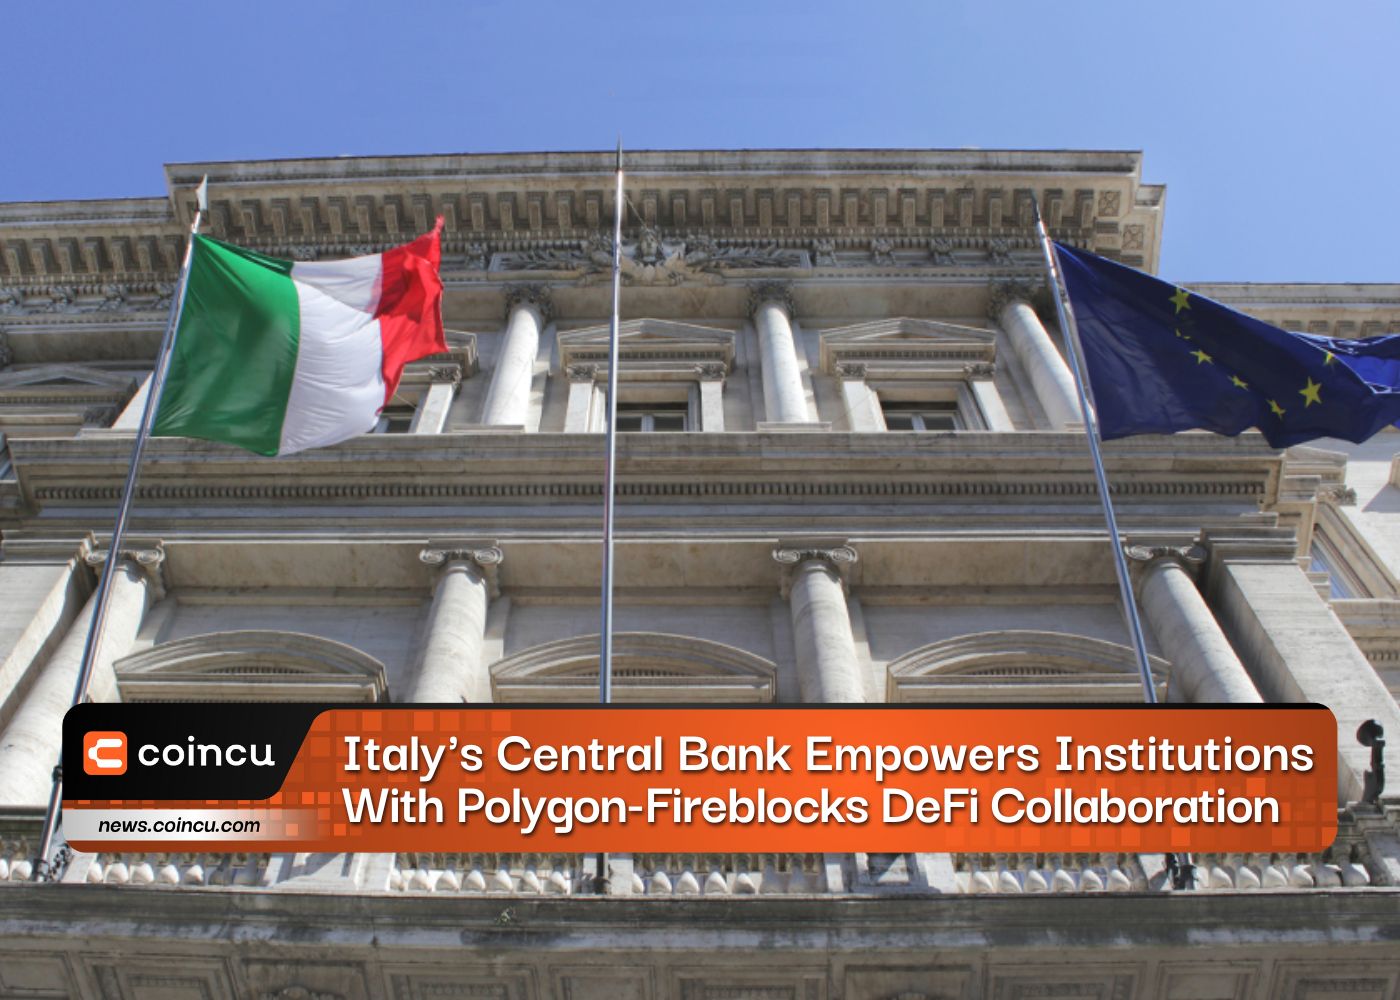 Italy’s Central Bank Empowers Institutions With Polygon-Fireblocks DeFi Collaboration